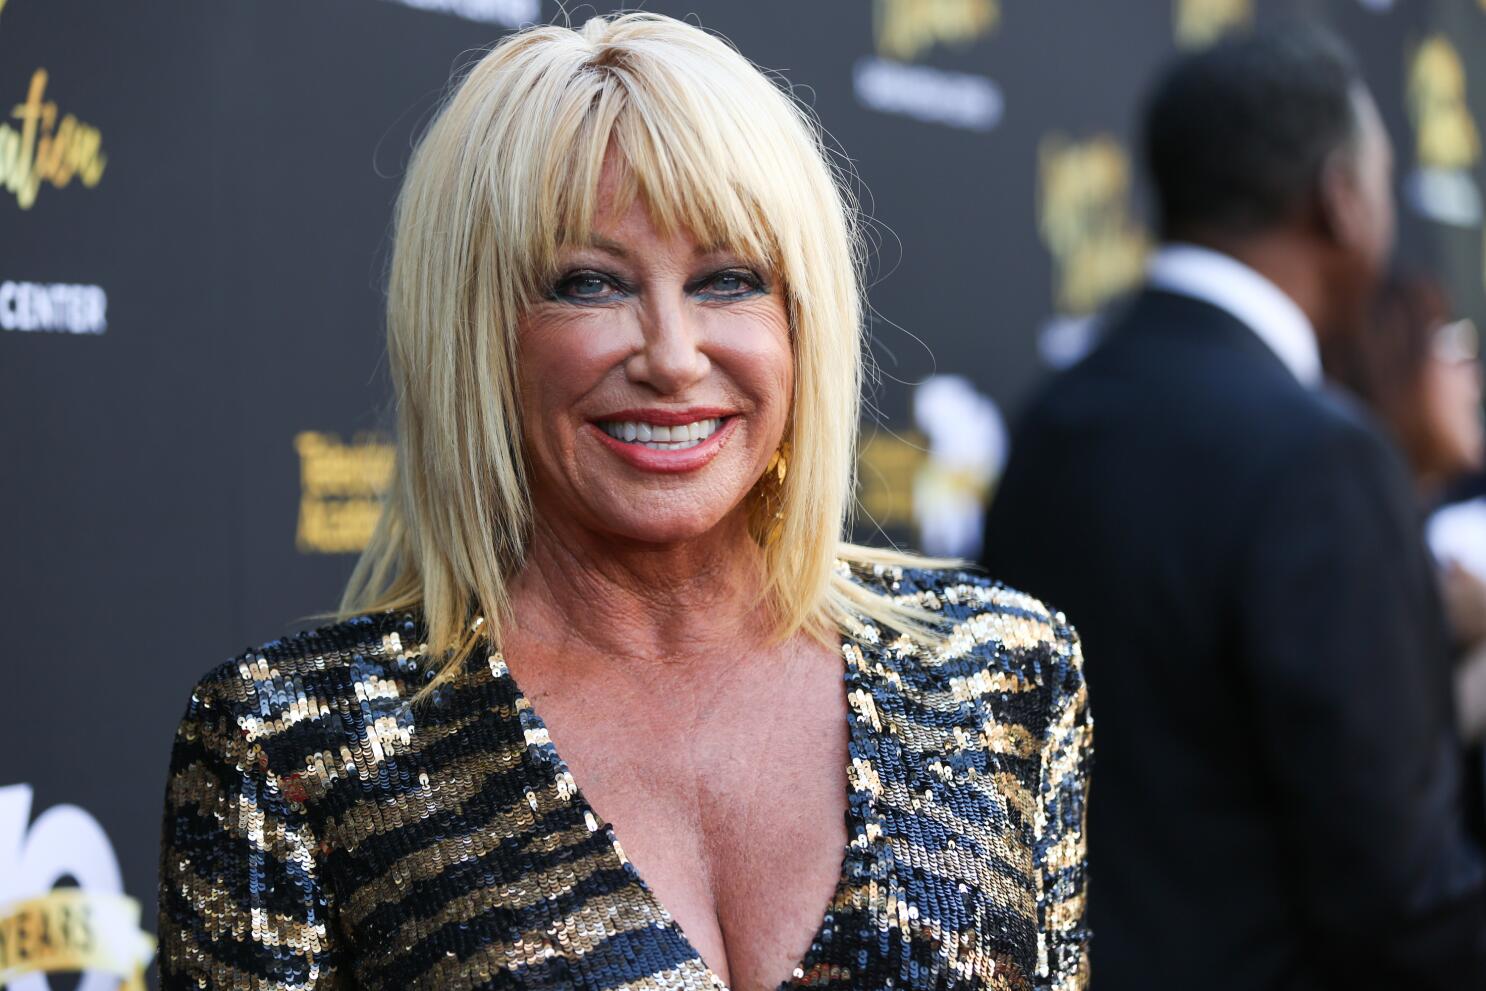 Suzanne Somers was pioneer in spreading medical misinformation